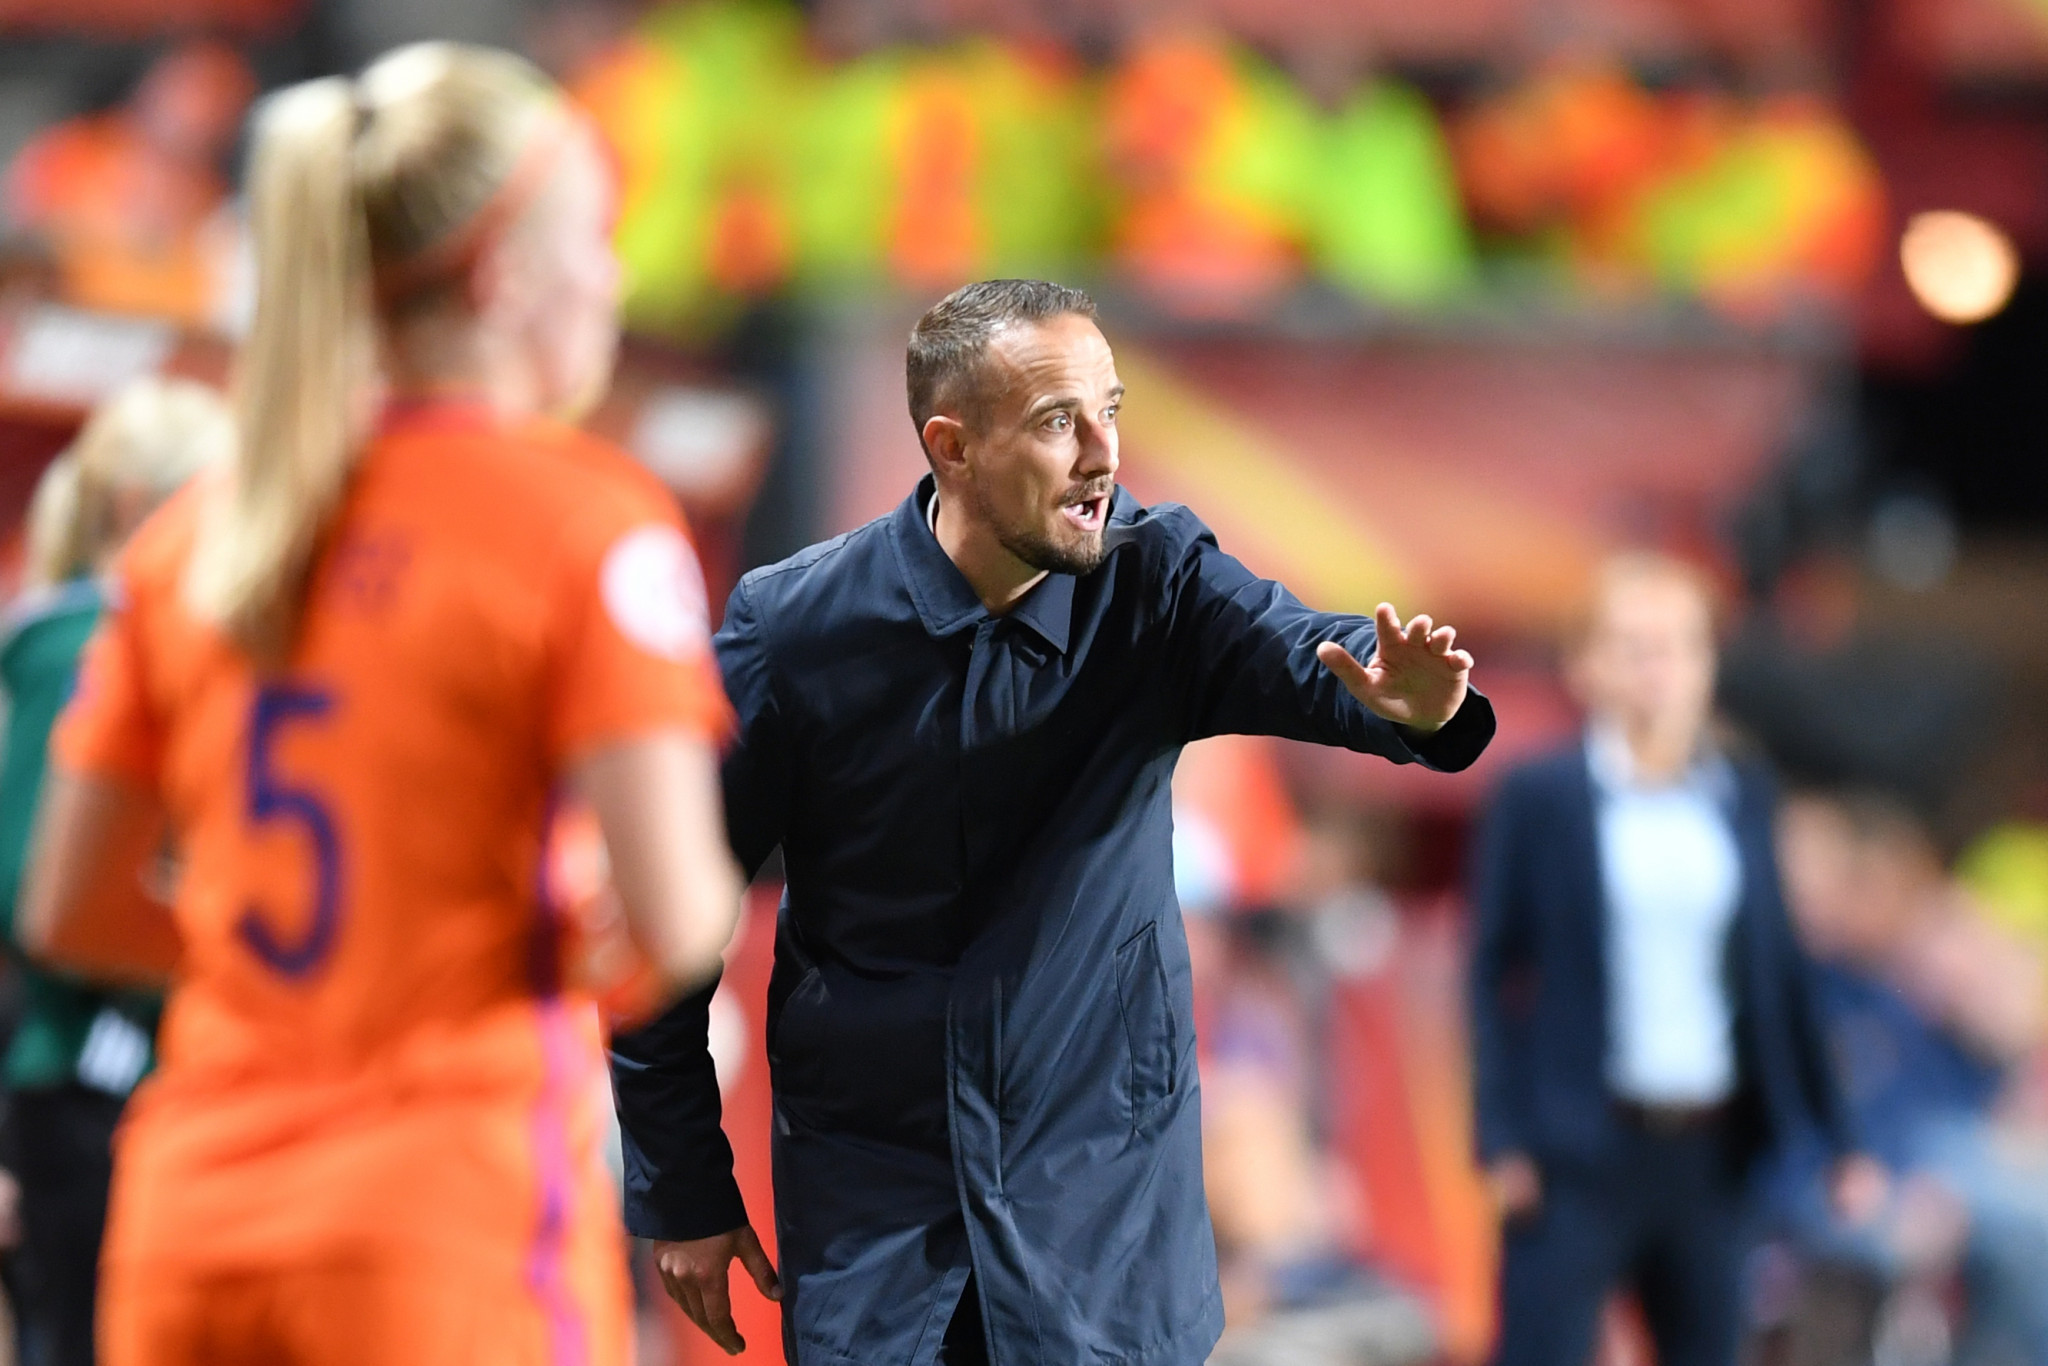 Mark Sampson was sacked as England's women's manager ©Getty Images